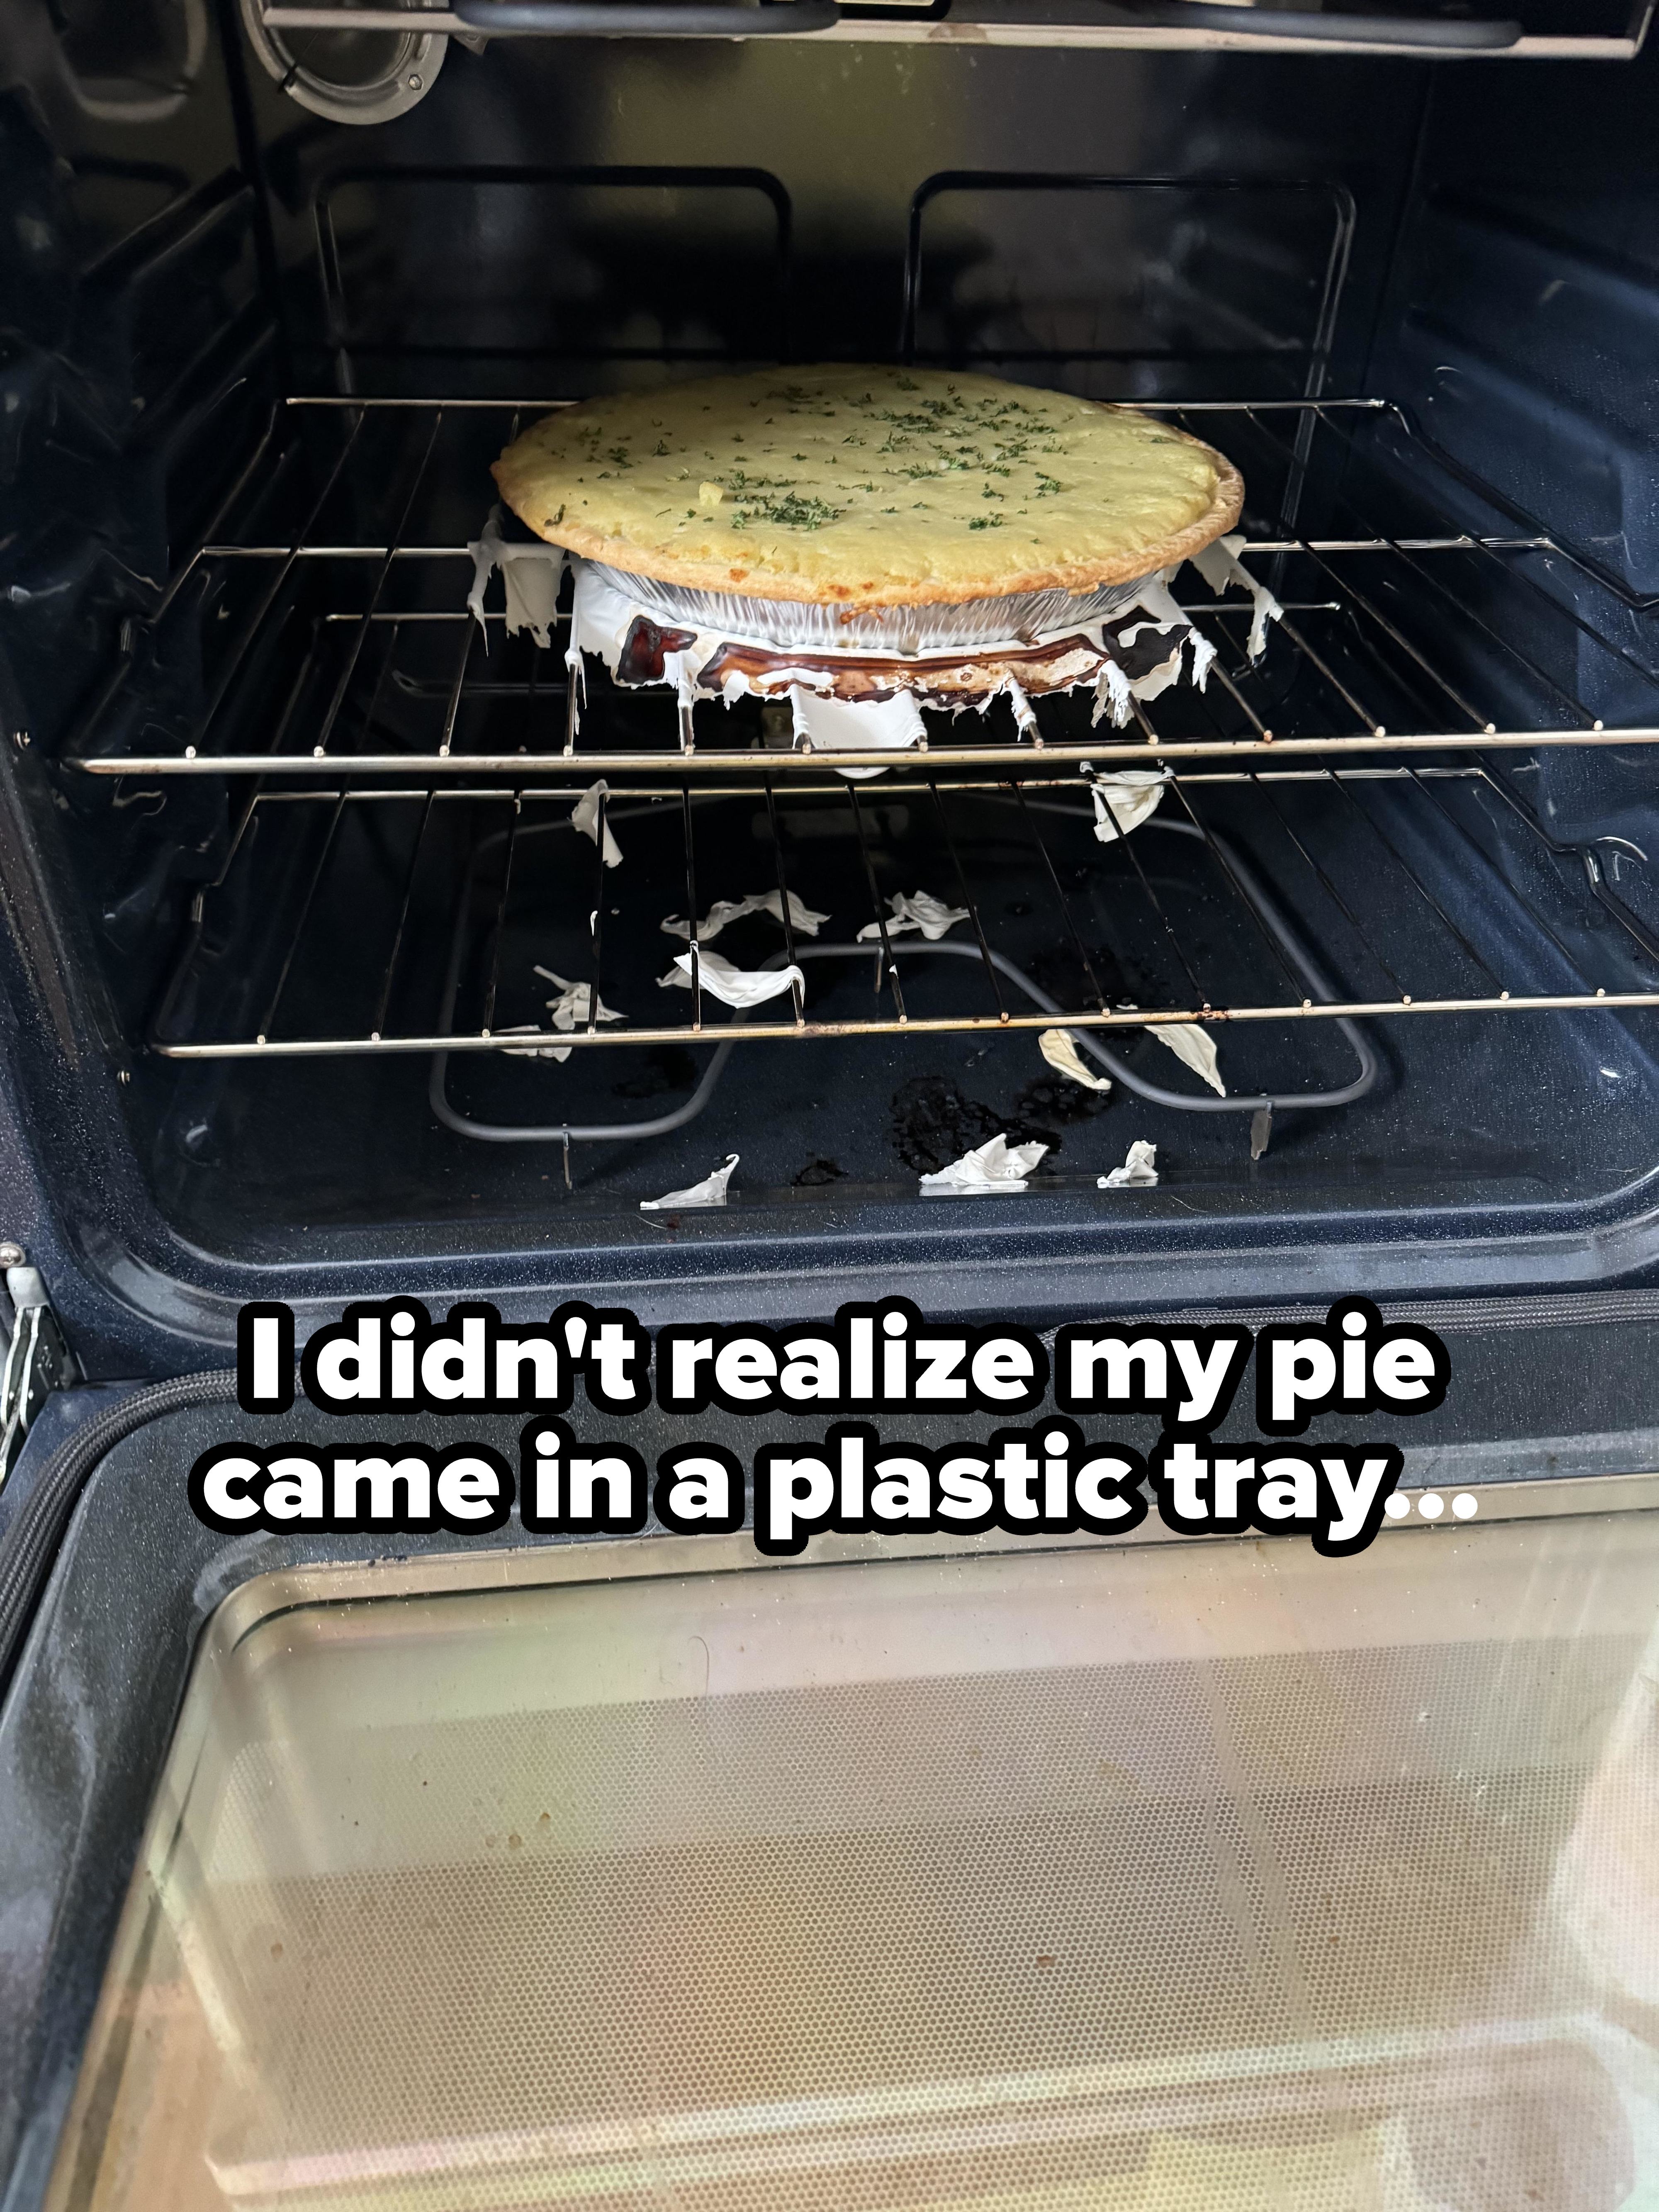 Melted plastic in an oven